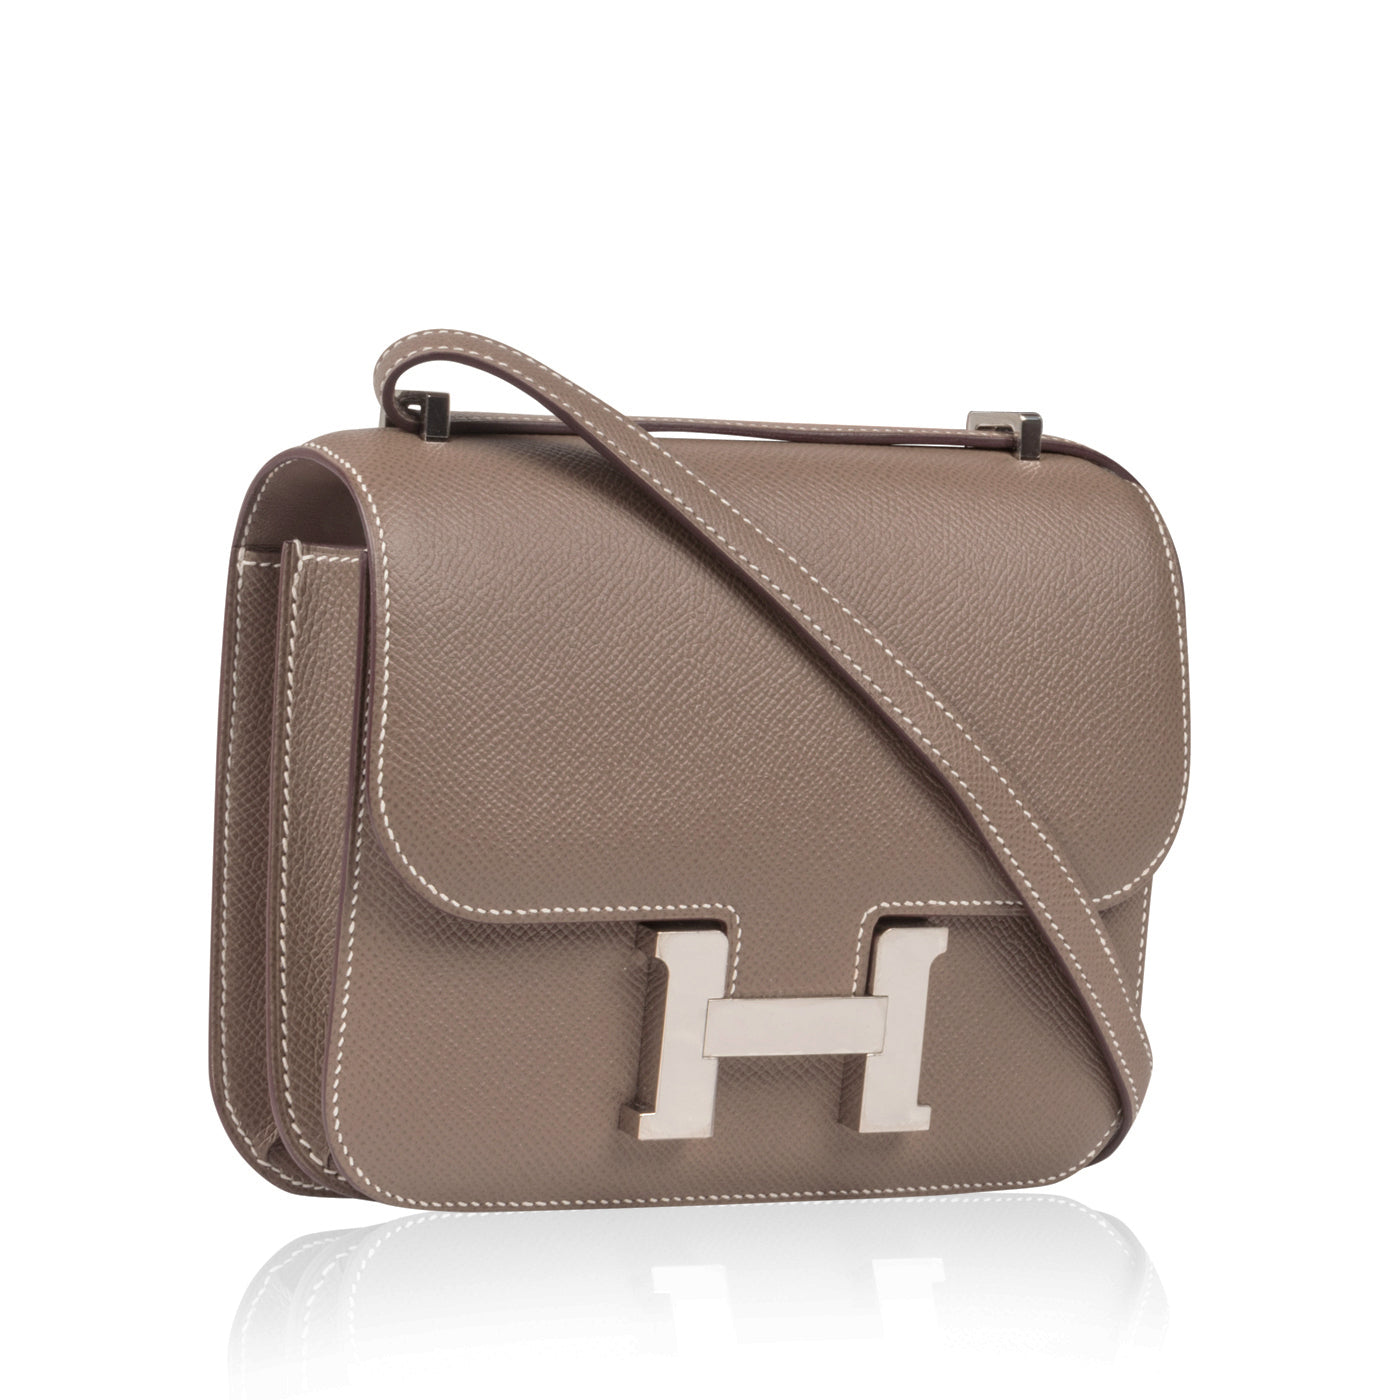 All about the Hermès Constance bag collection